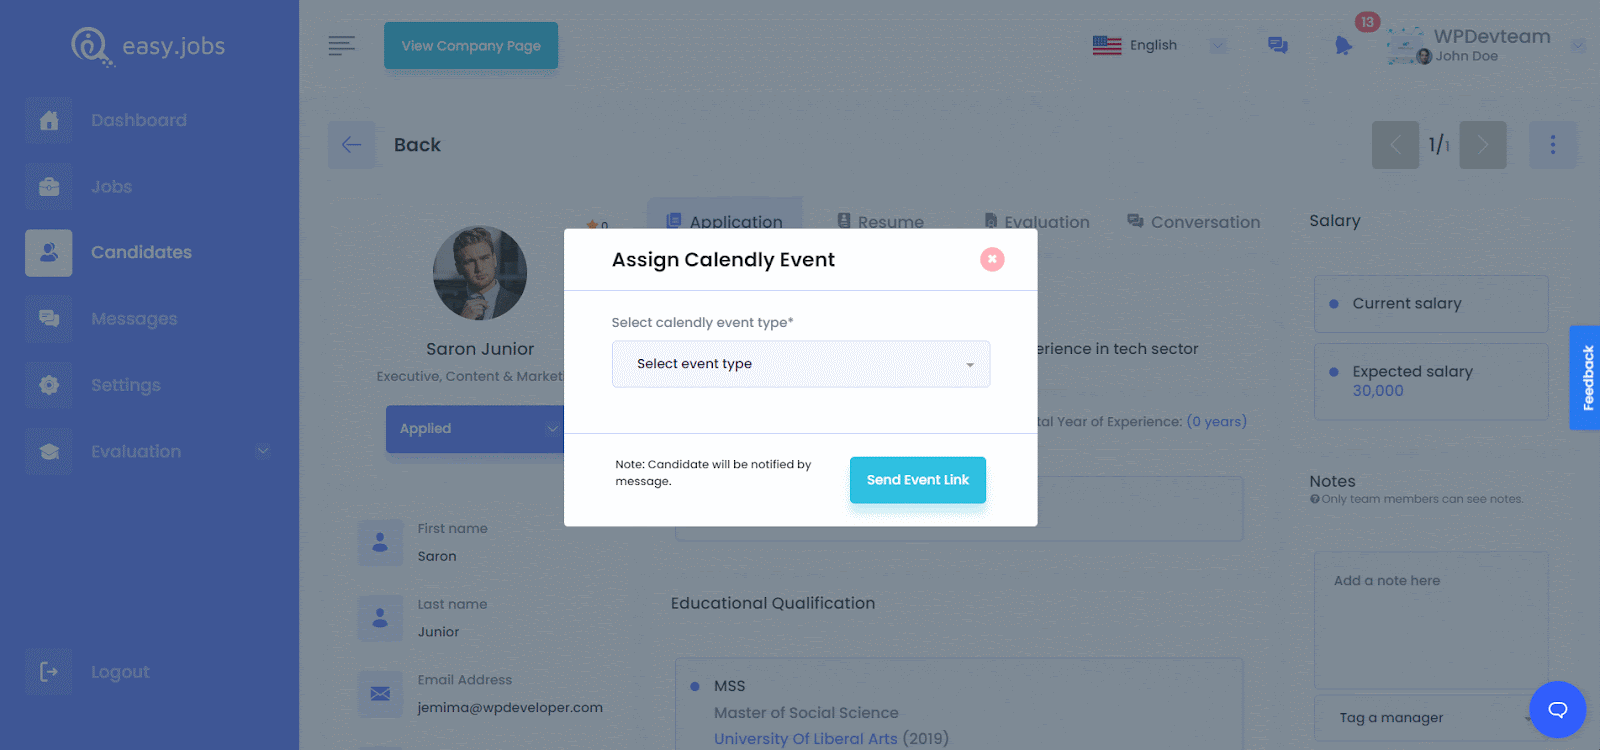 Integrate Calendly With easy.jobs